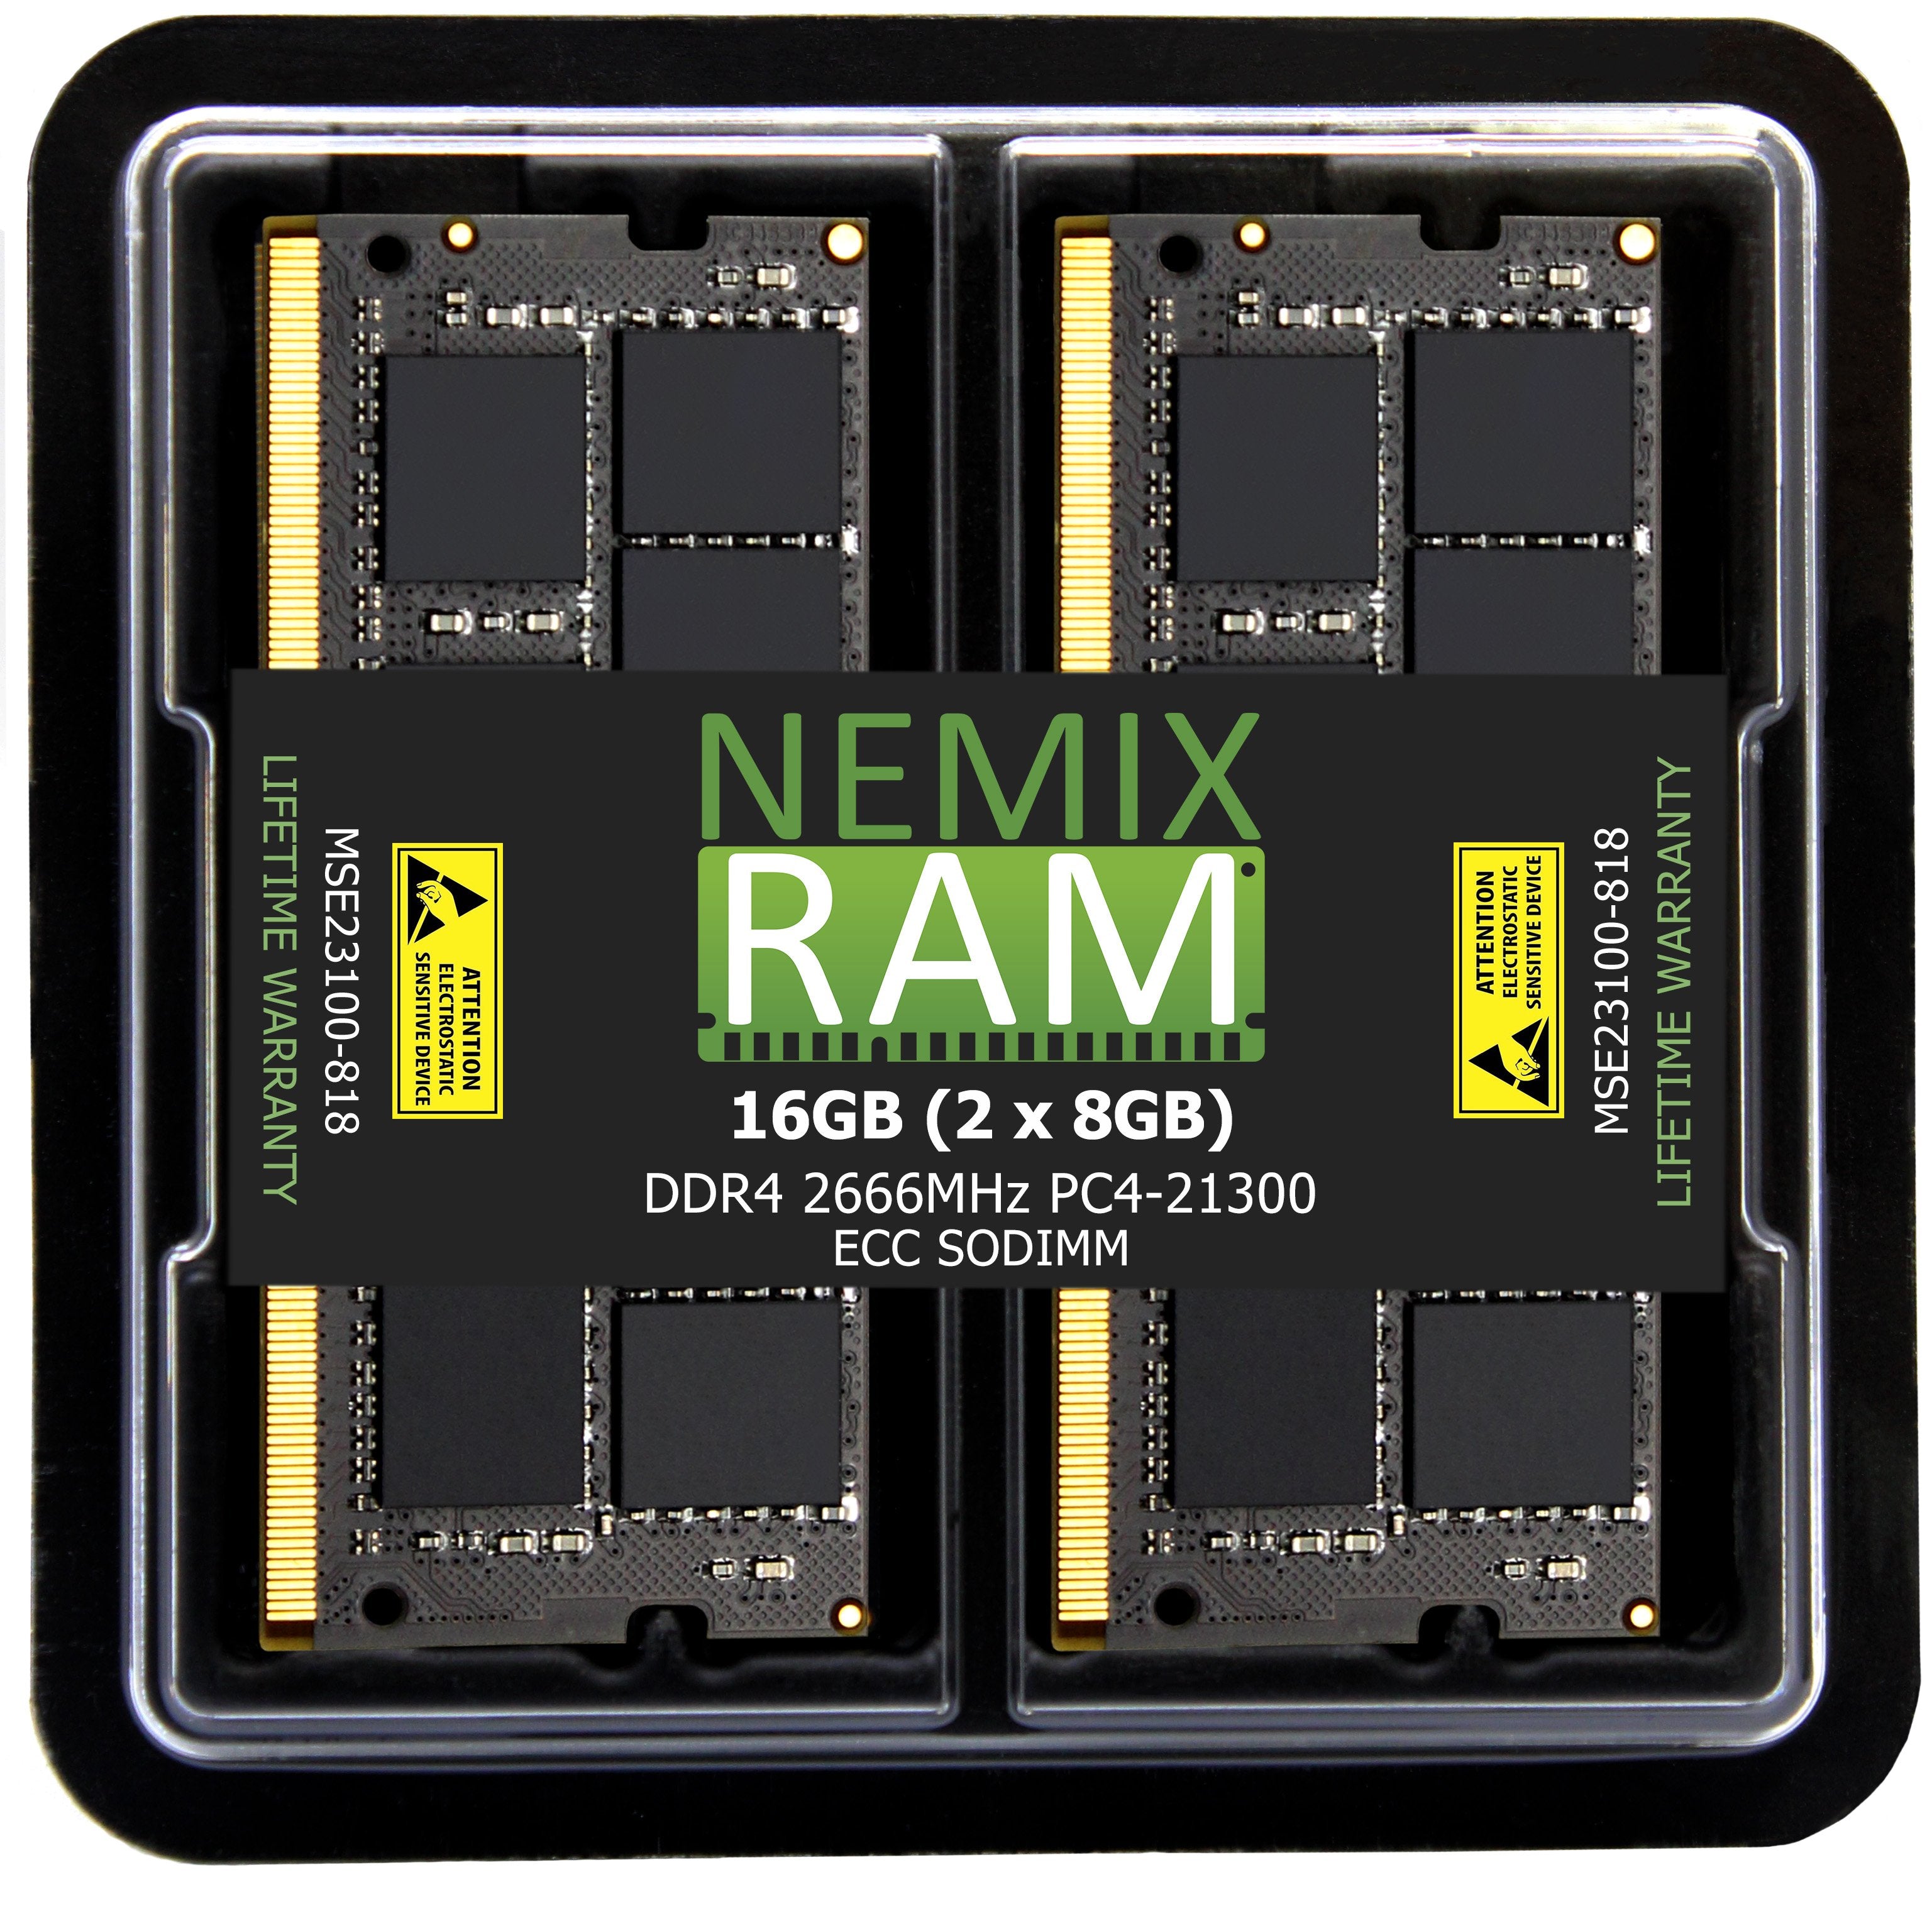 DDR4 2666MHZ PC4-21300 ECC SODIMM Compatible with Synology RackStation RS822+